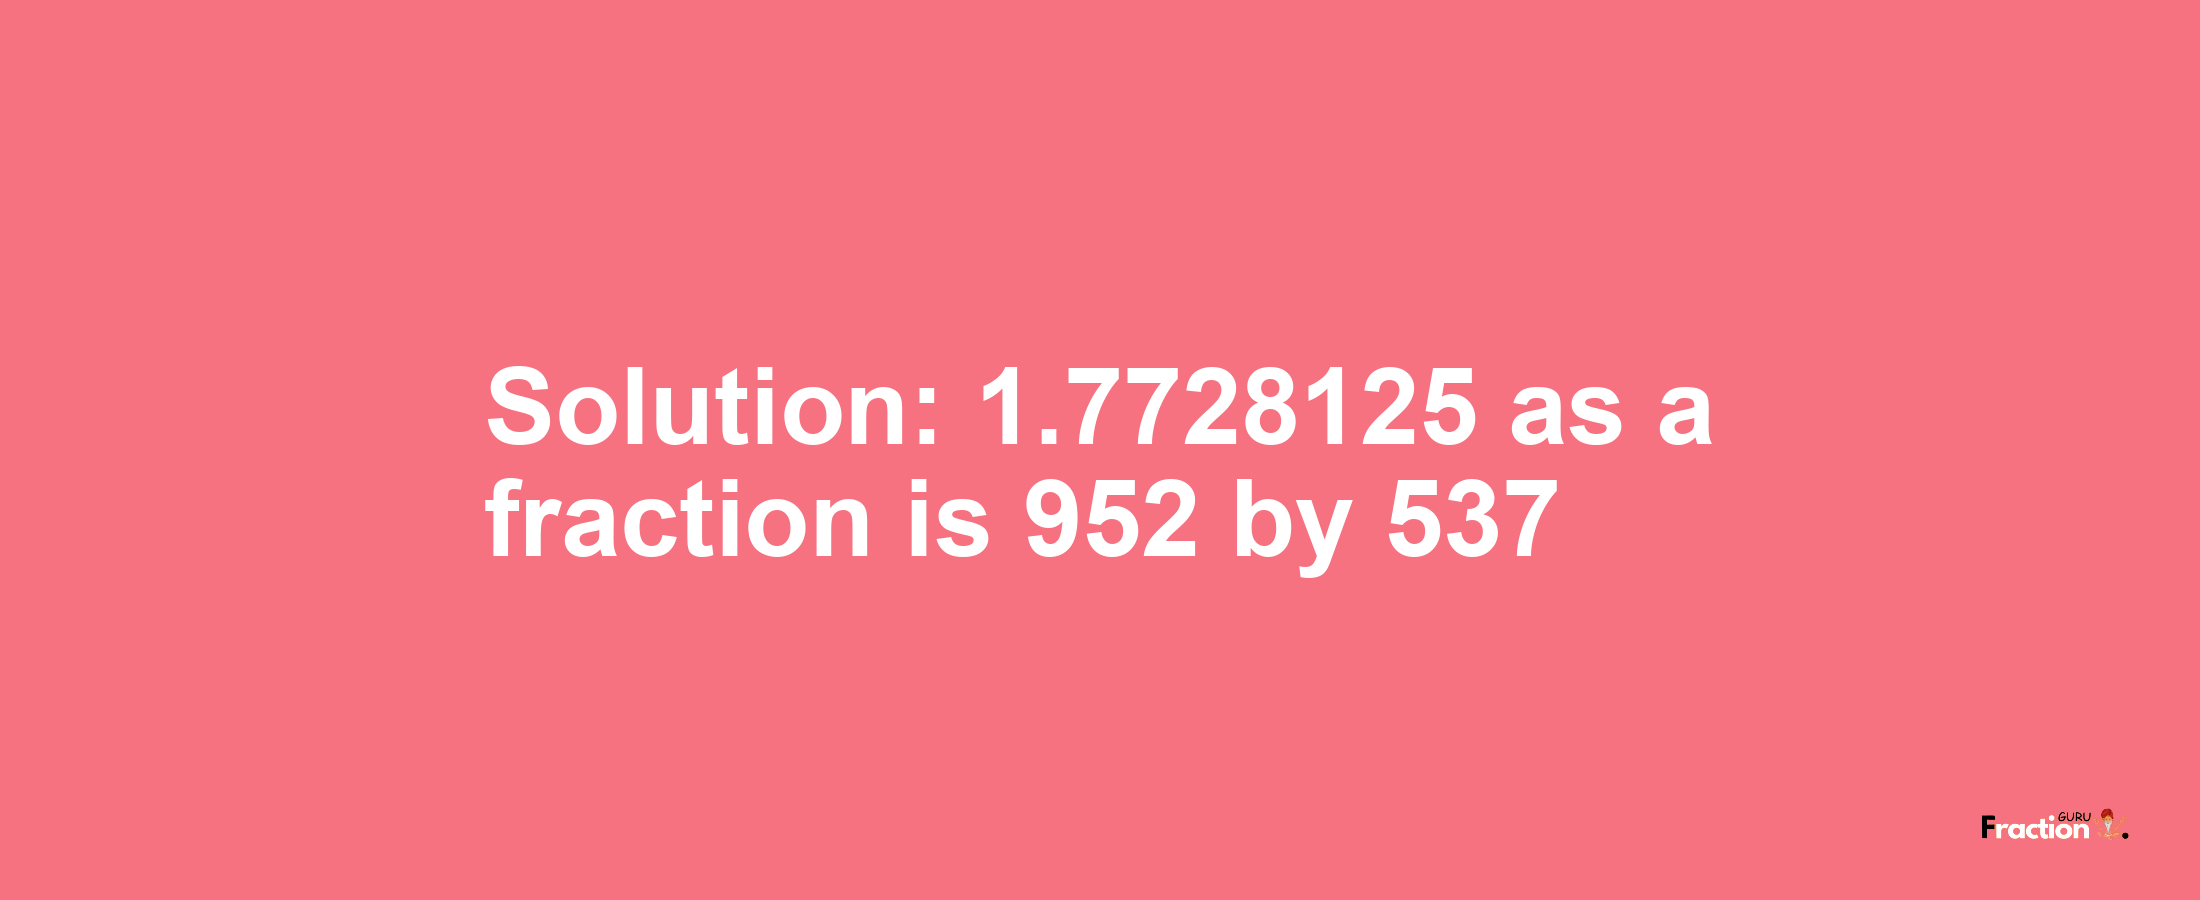 Solution:1.7728125 as a fraction is 952/537